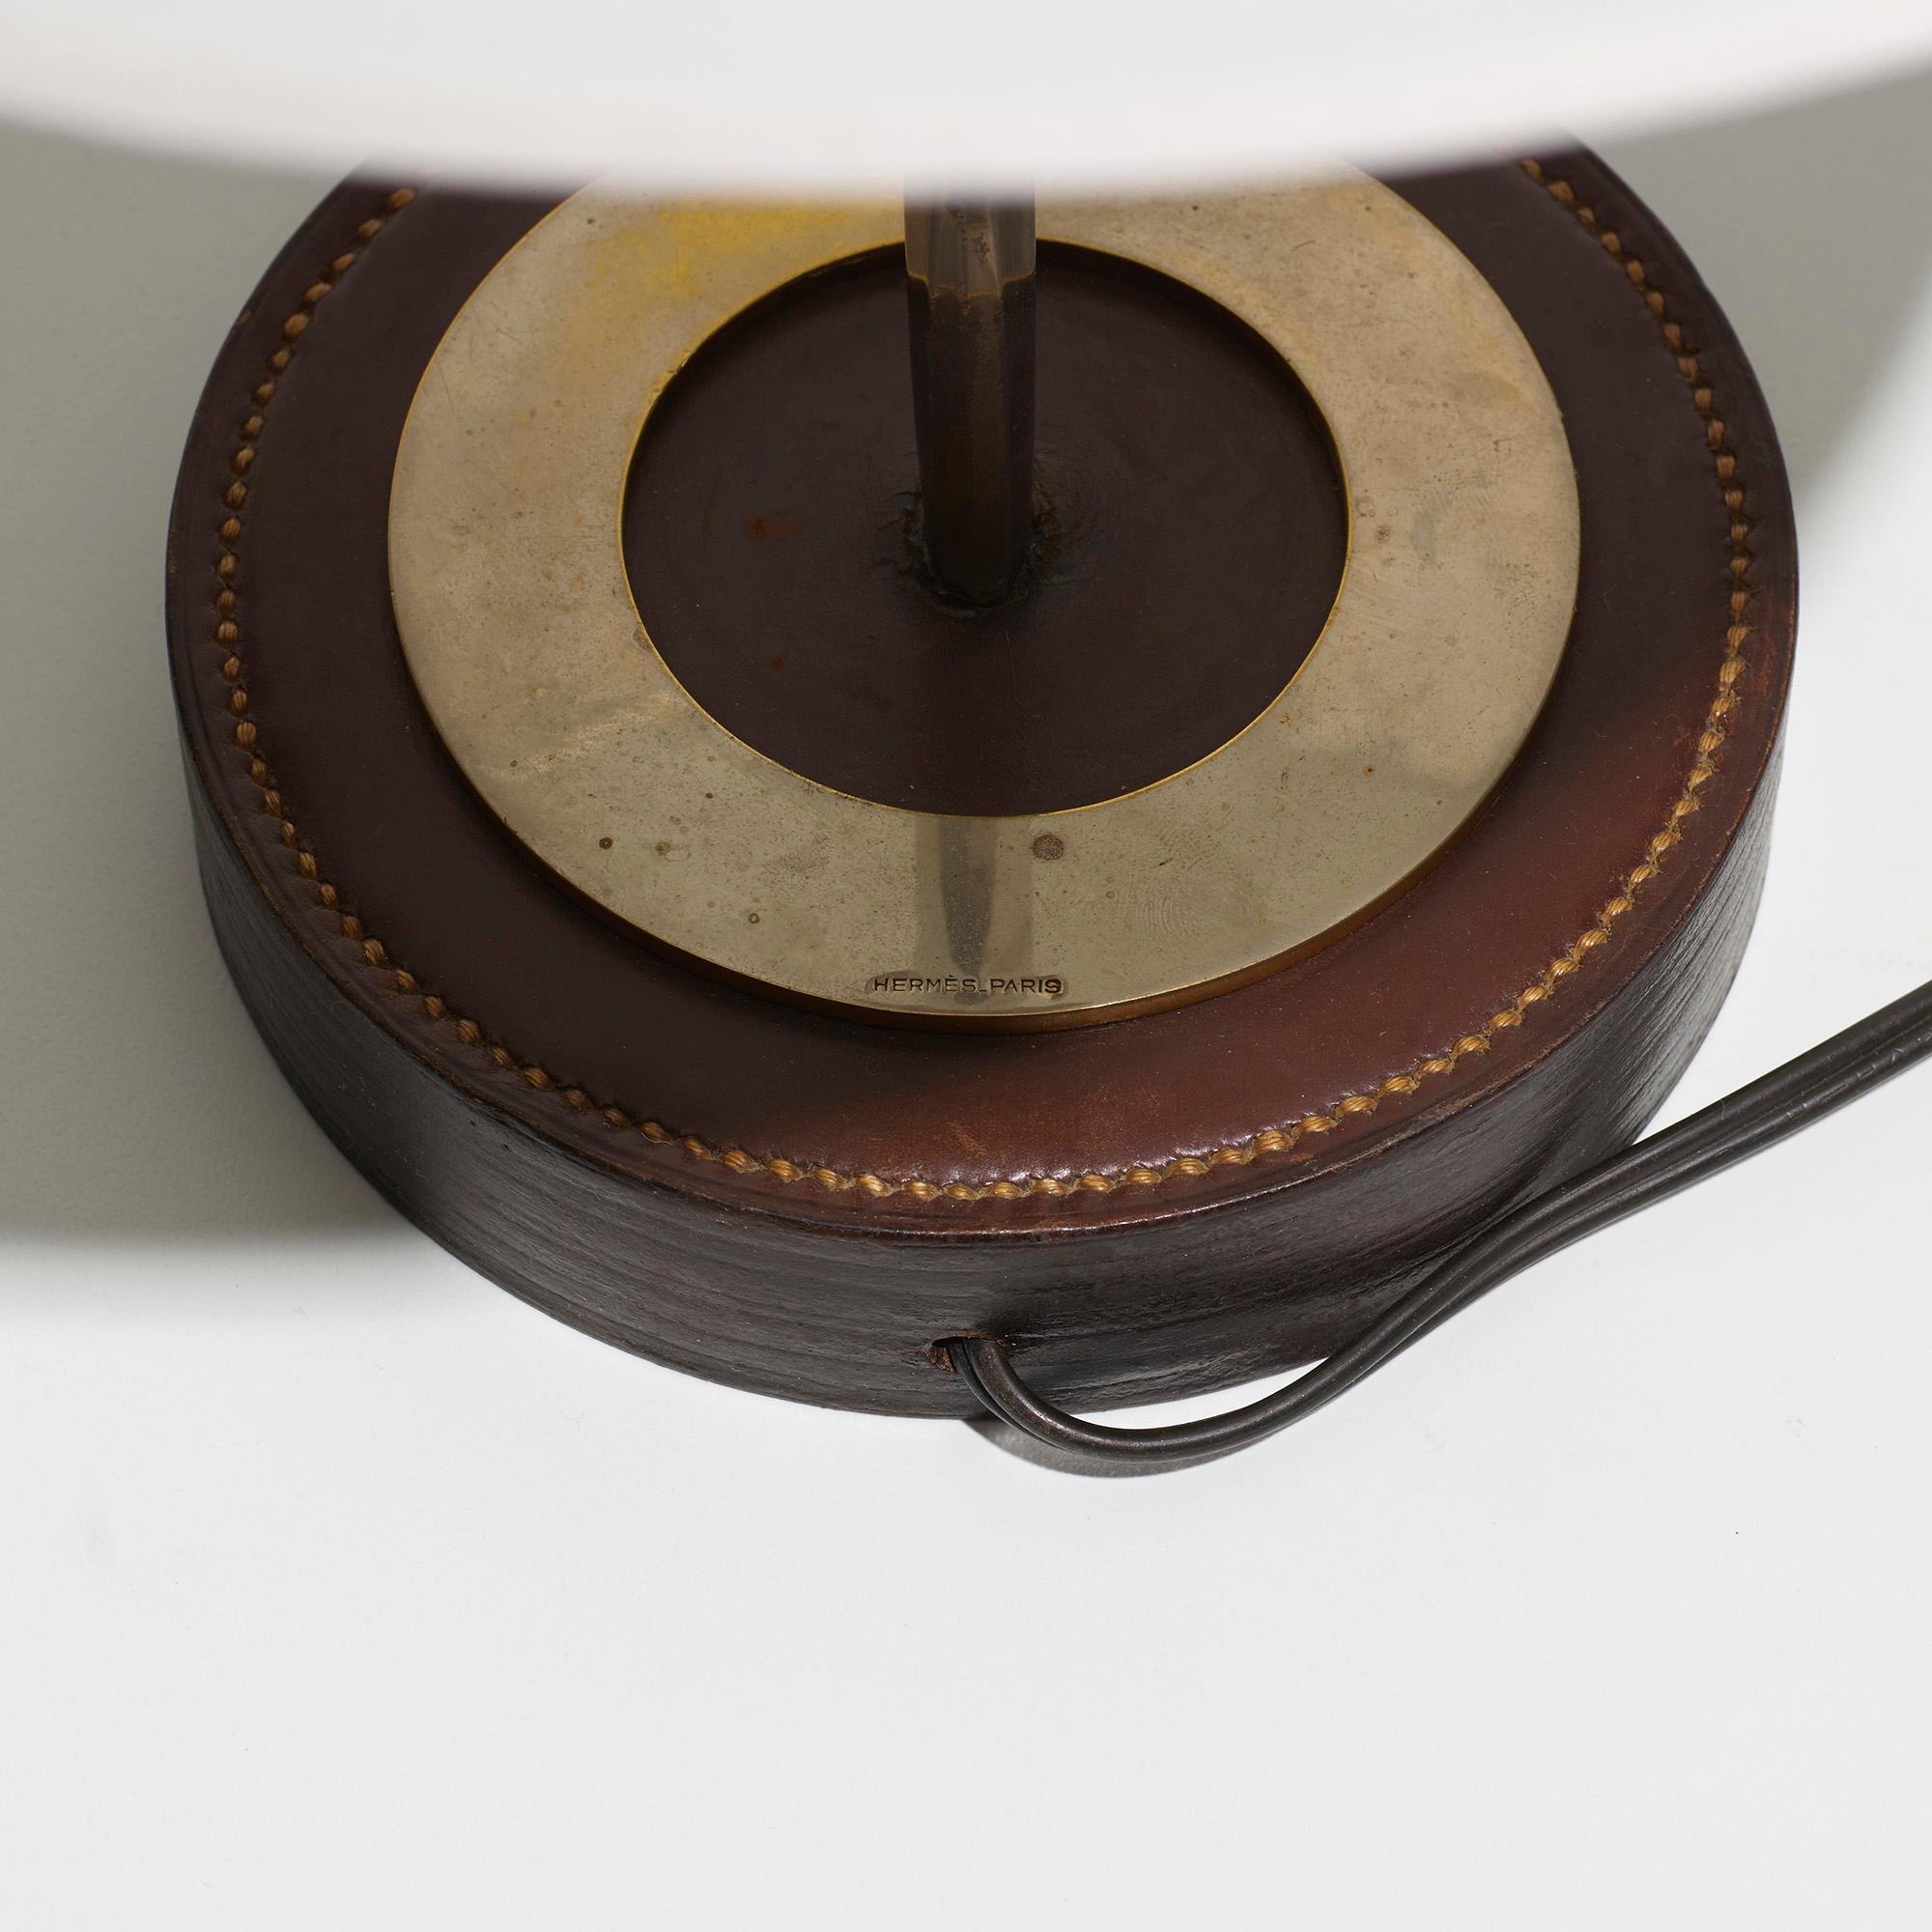 Made in: France, c. 1950

Material: stacked box leather, nickel-plated brass, brass, paper

Size: 12 diameter × 16.5 height in

Description: Signed to base ‘Hermès-France 24 FG ST Honore’.